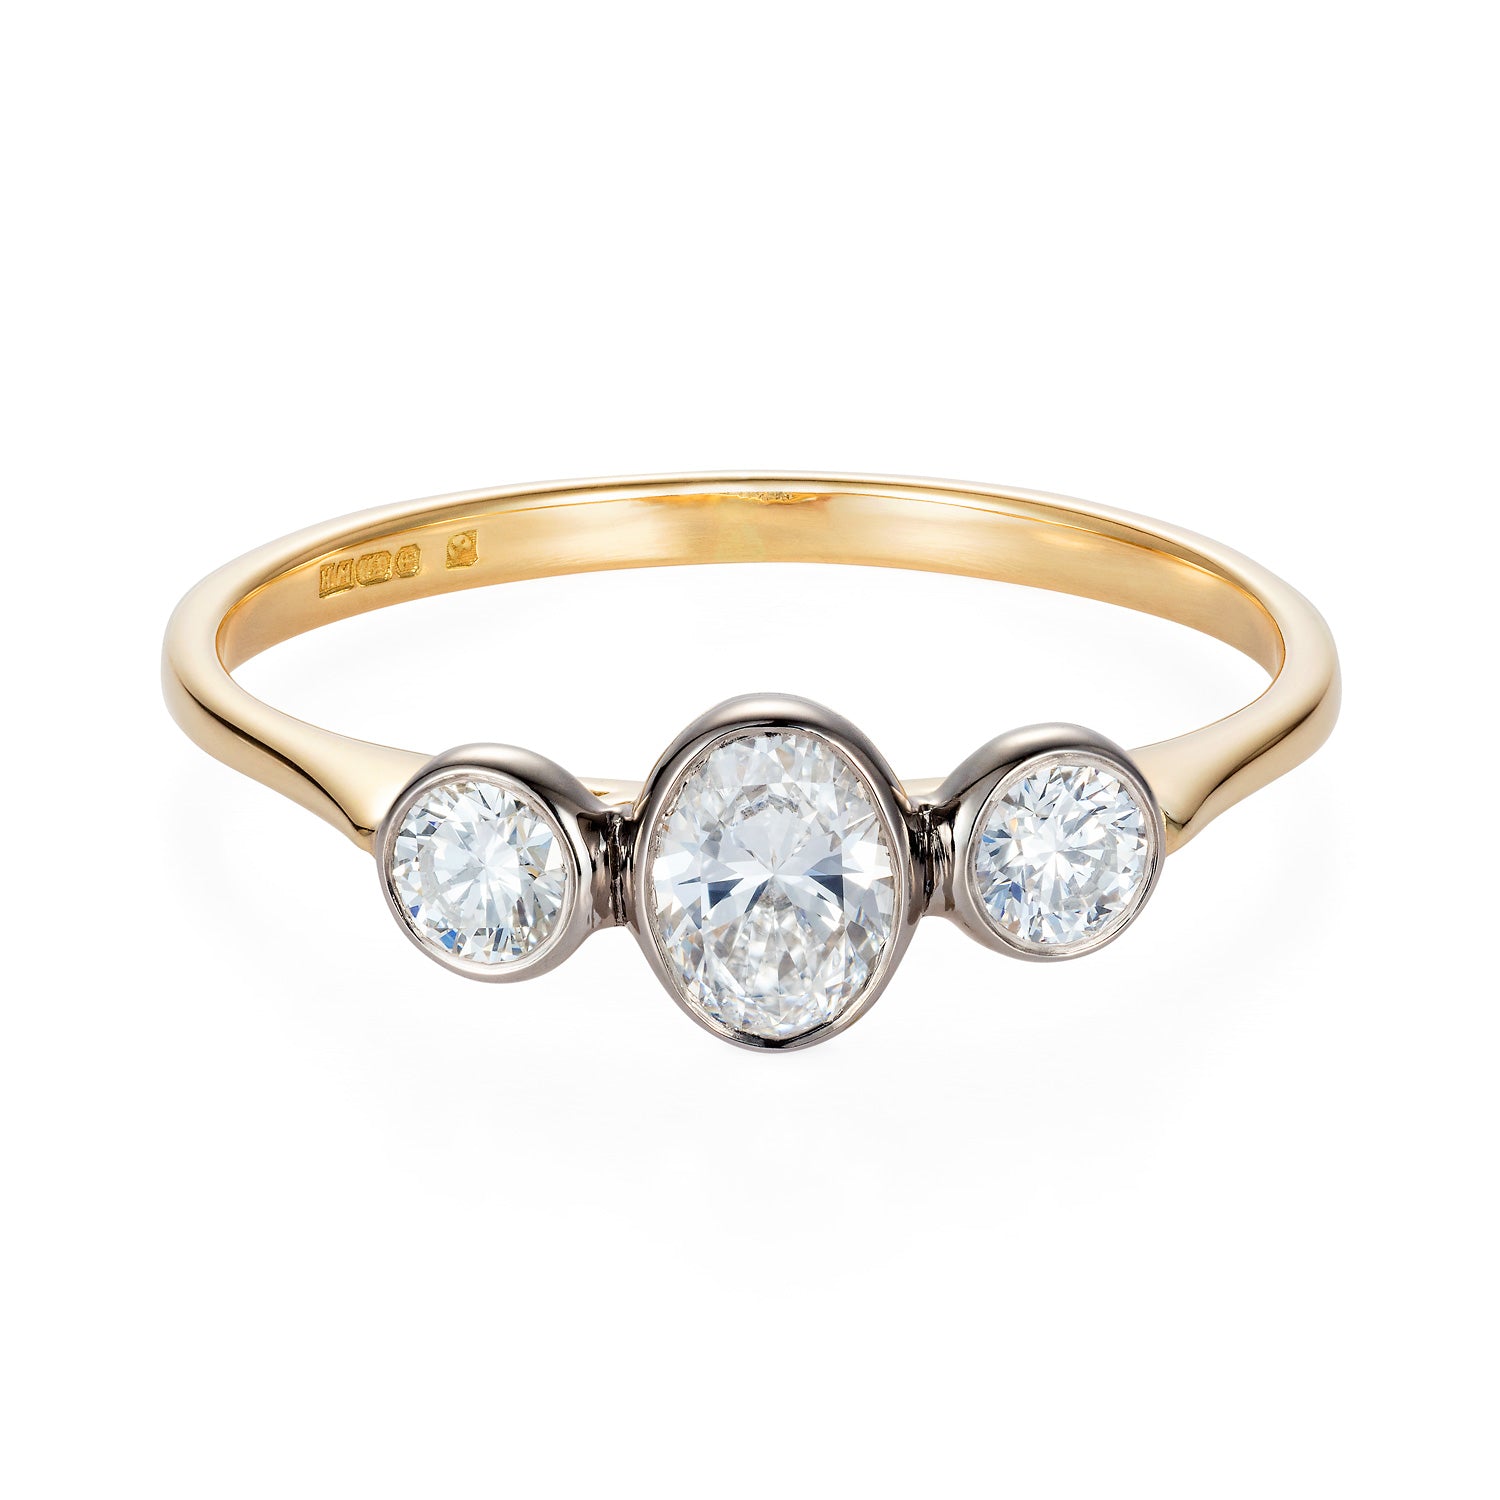 Queen Victoria Engagement Ring by Yasmin Everley